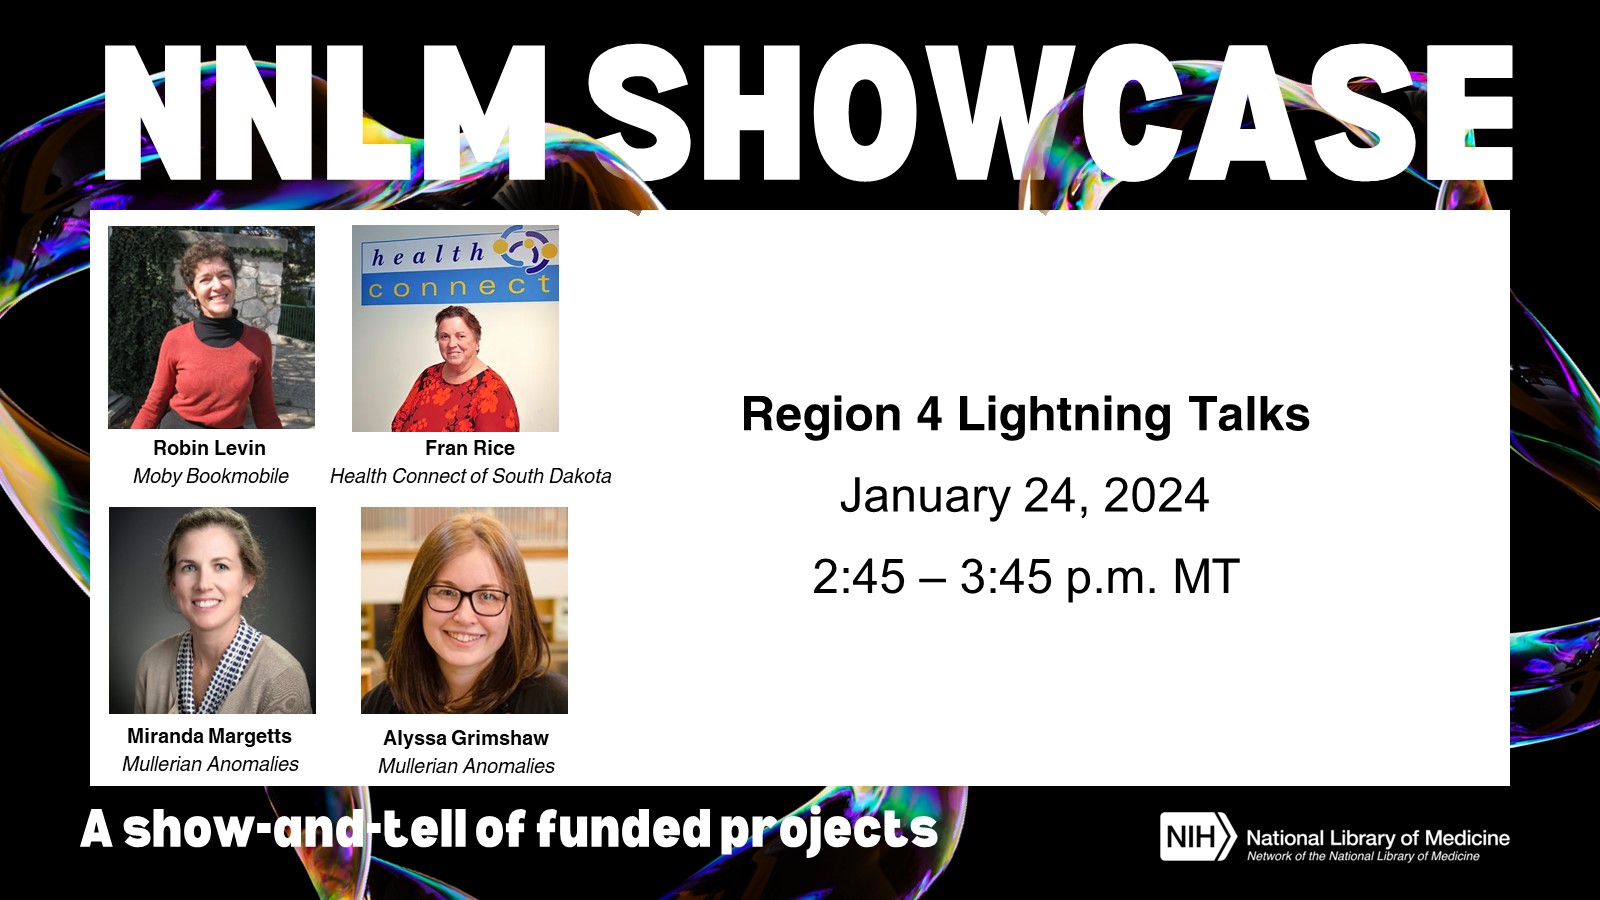 Stylized graphic advertising NNLM Showcase 2024, a show-and-tell of funded projects. Session title: R4 Lightning Talks. Session date and time: January 24, 2024 2:45-3:45pm. Presenters: Robin Levin, Fran Rice, Miranda Margetts, and Alyssa Grimshaw.